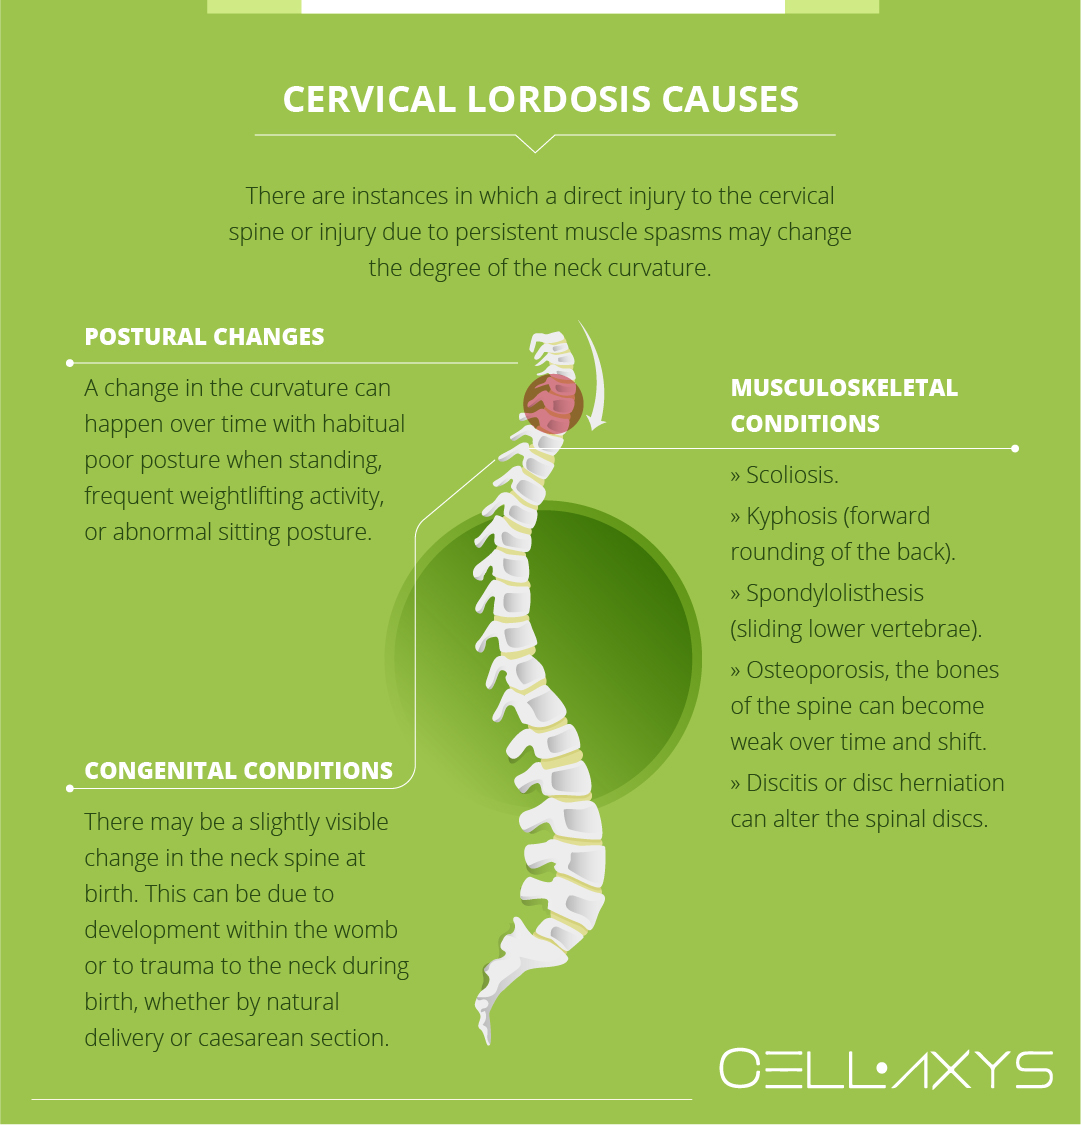 What Causes Cervical Lordosis